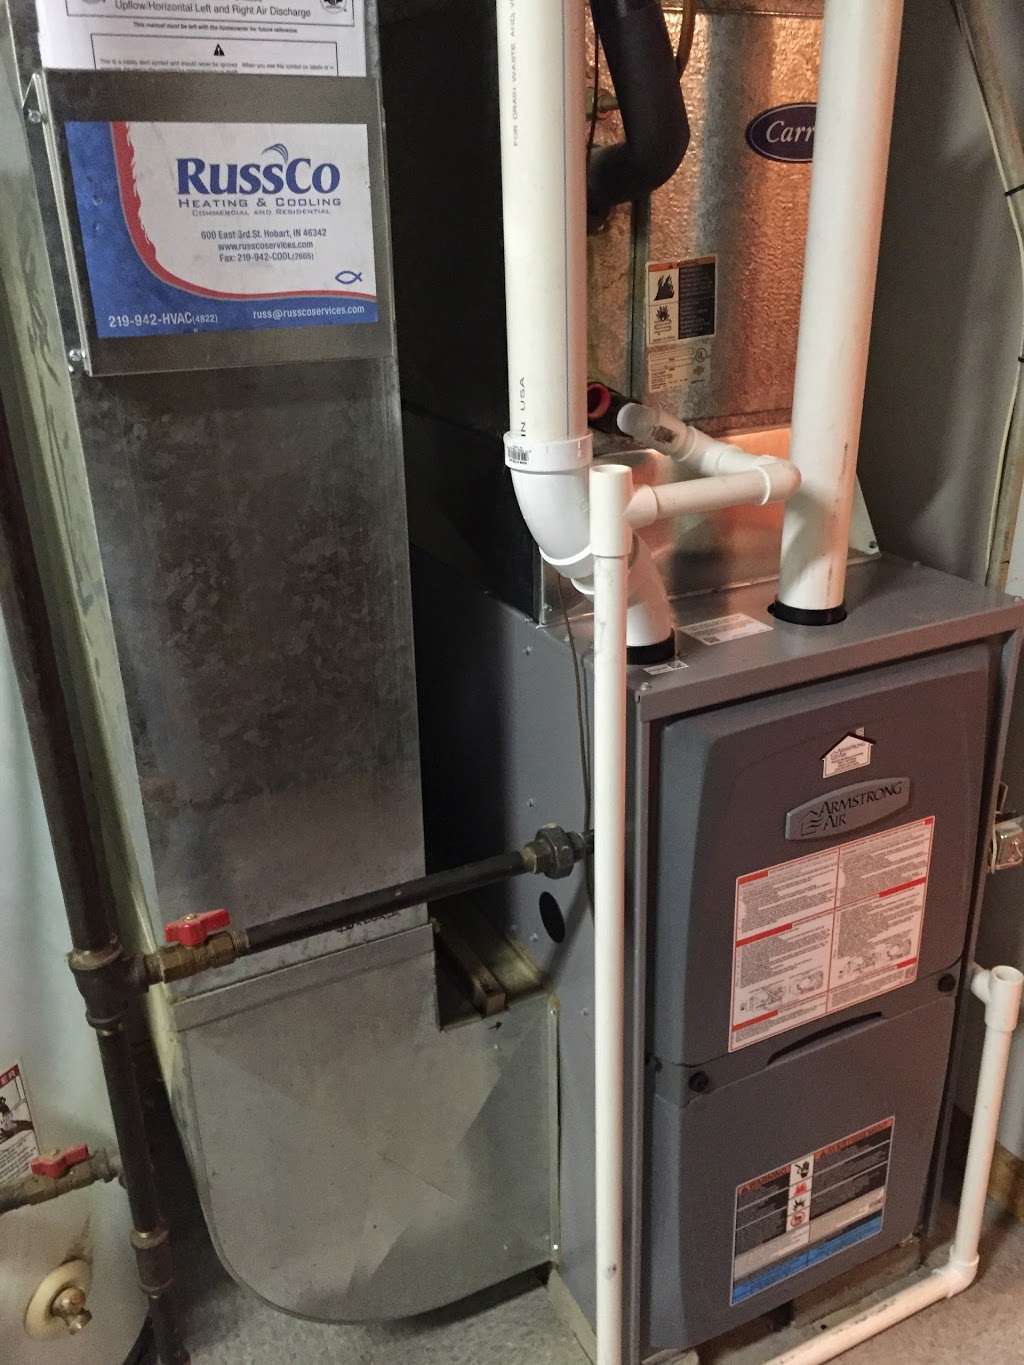 RussCo Heating and Cooling | 350 IN-130, Hobart, IN 46342, USA | Phone: (219) 942-4822